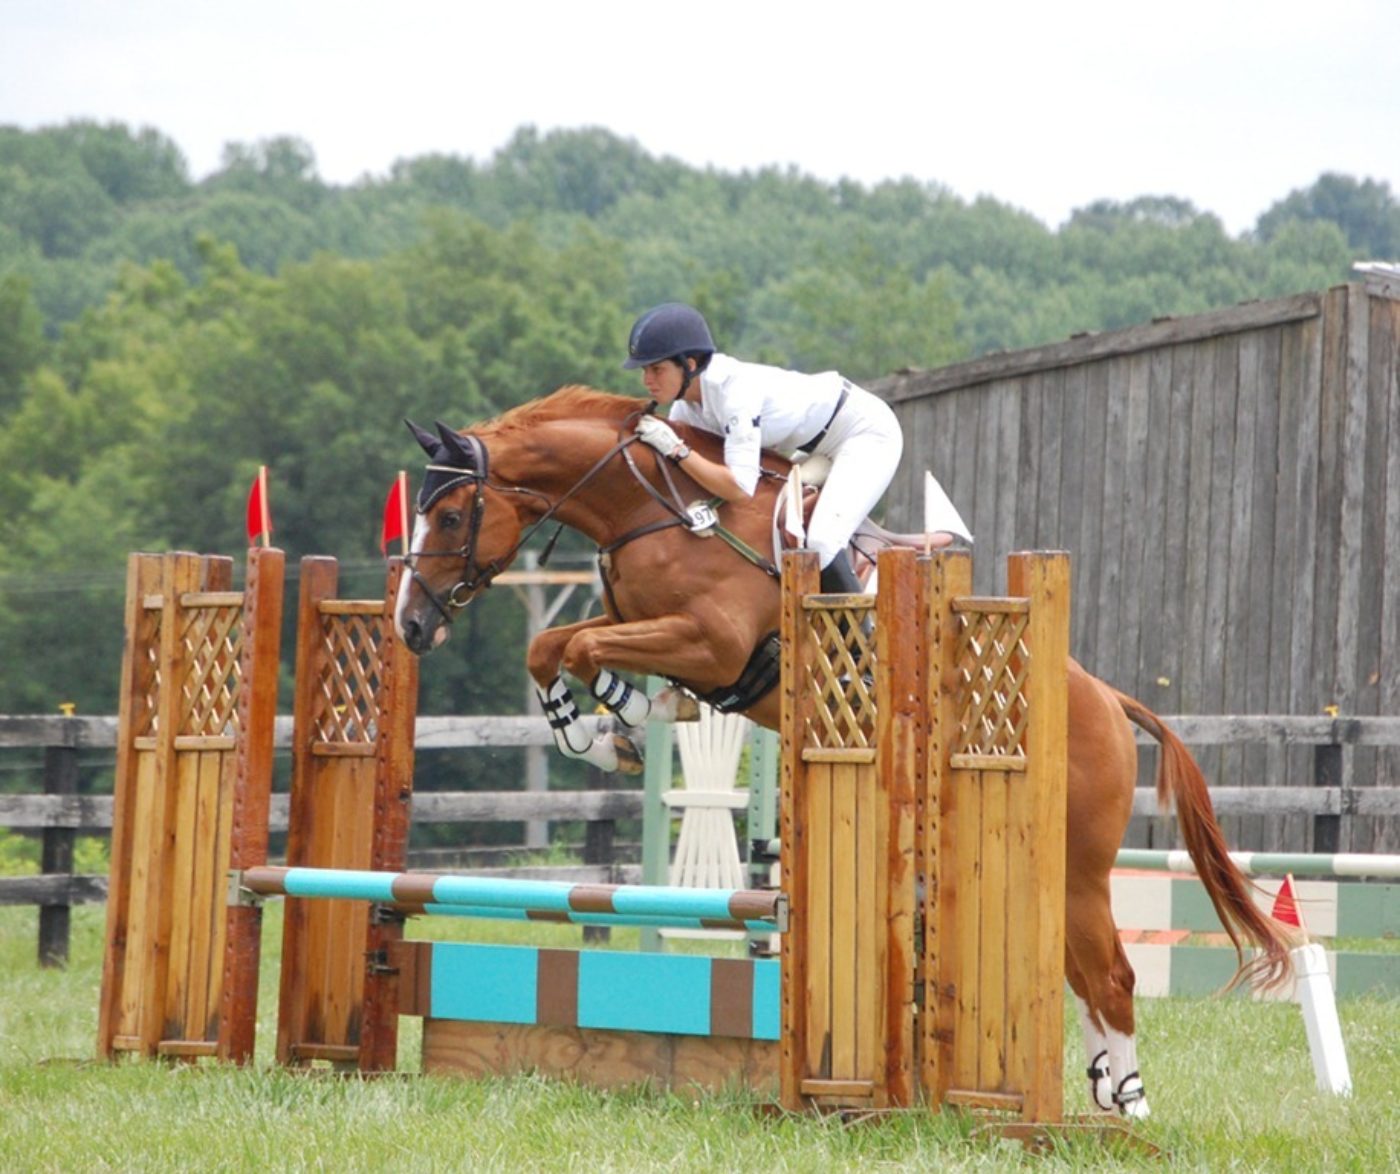 Meghan O’Donaghue piloted Cedric to a second place finish in his very first Horse Trials.